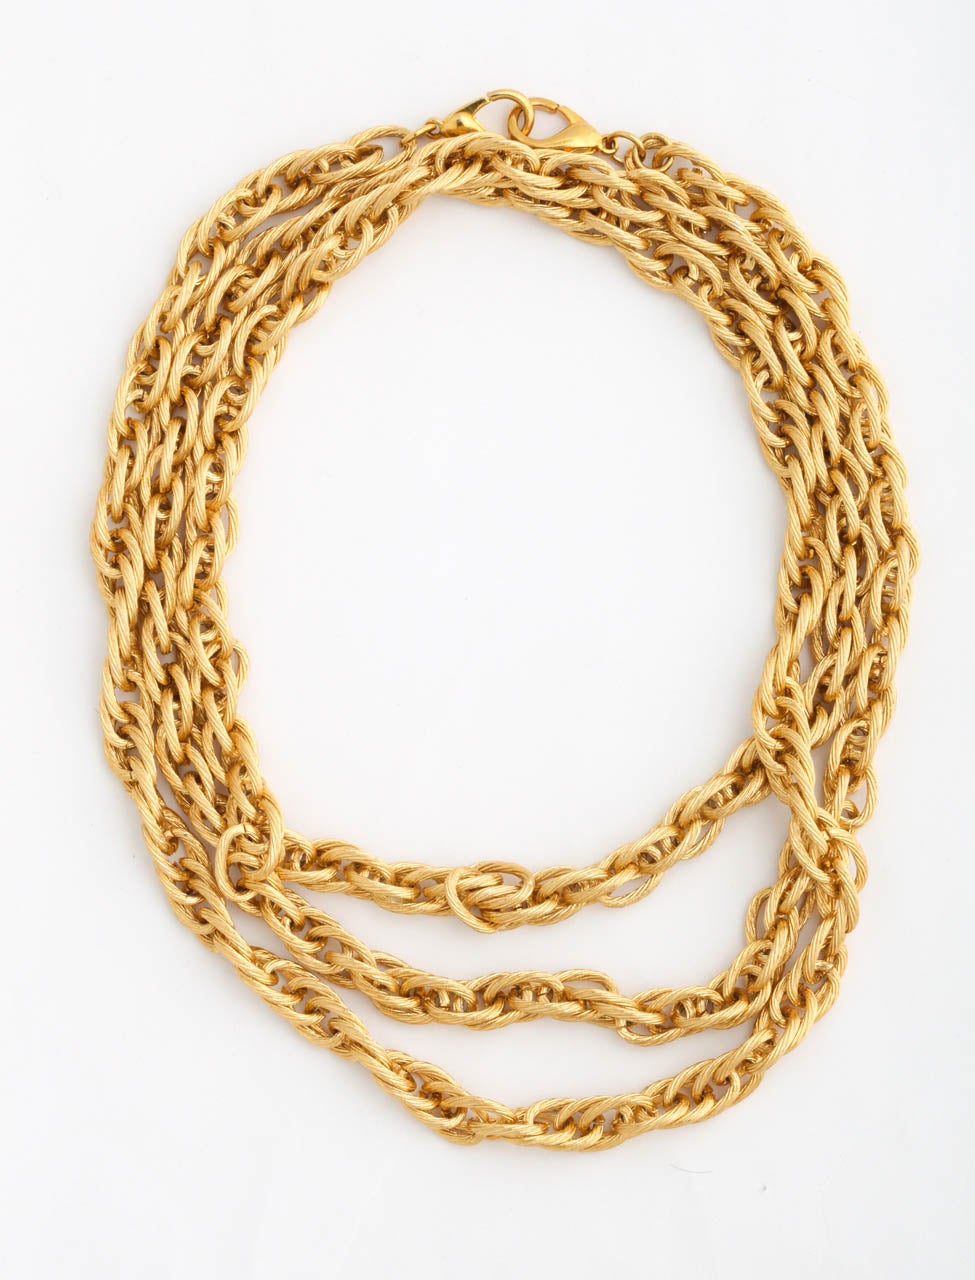 Rope textured, bright goldtone chain necklace. Lightweight.